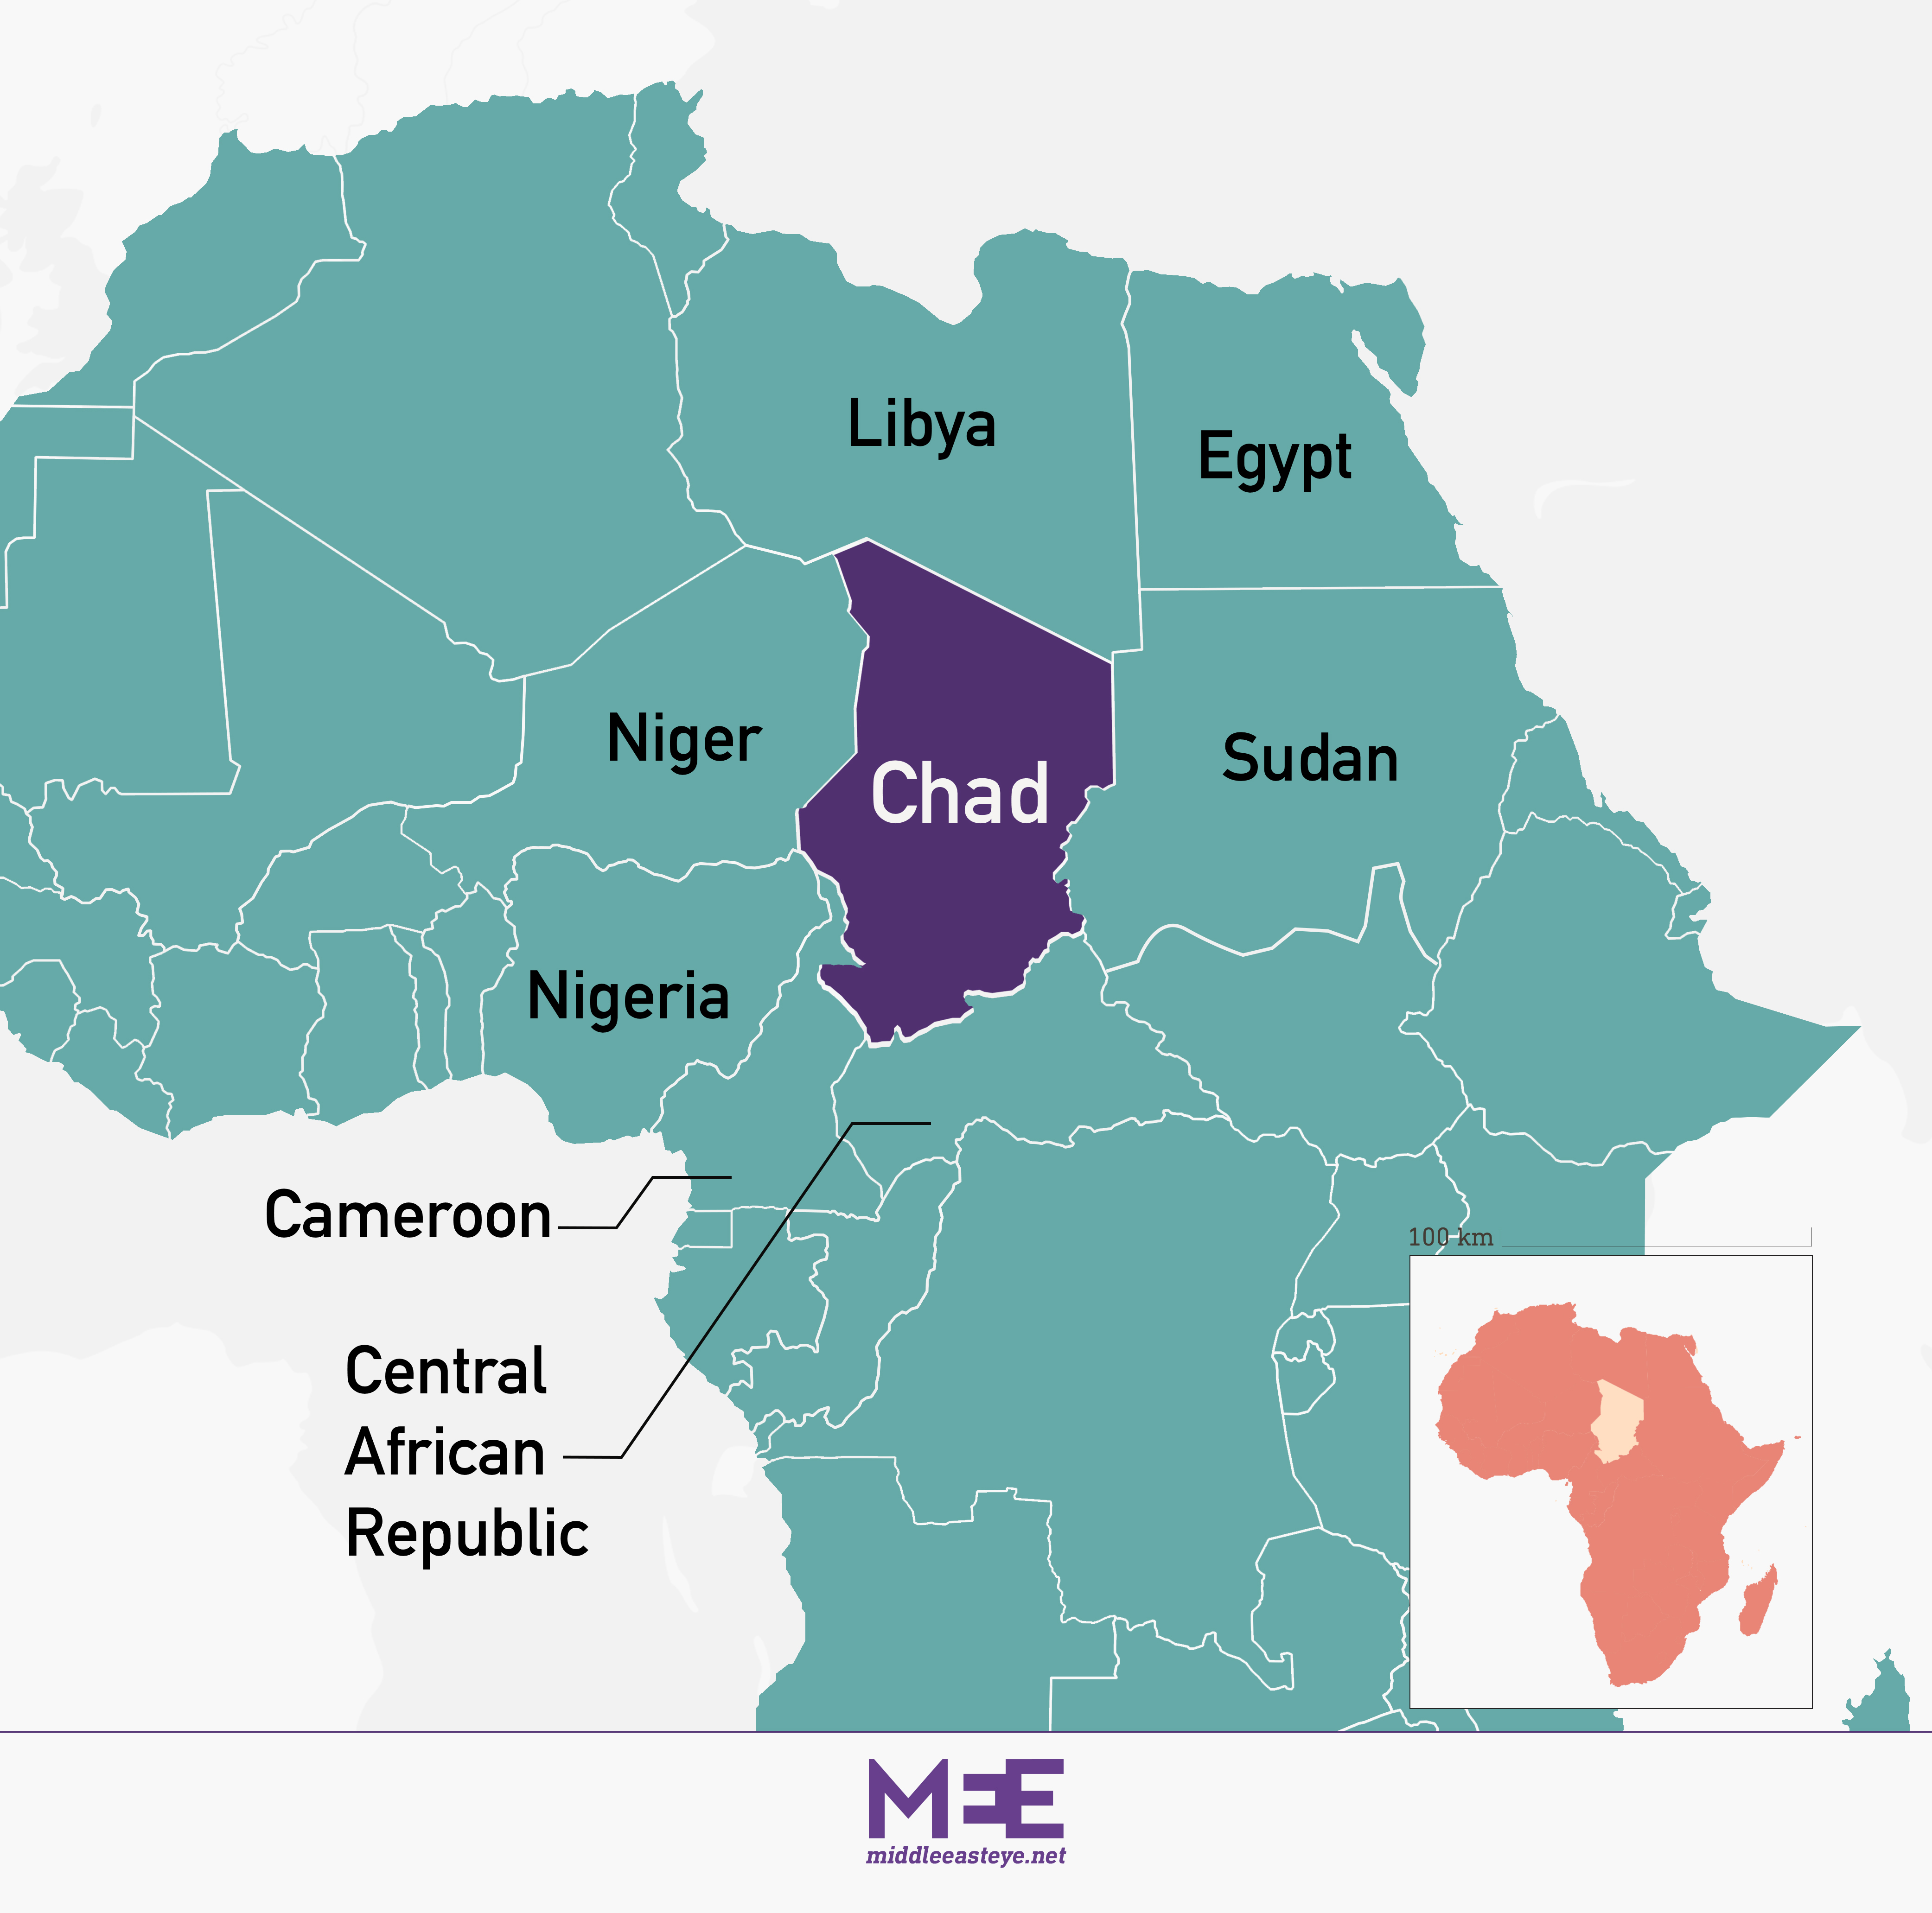 Chad is located in Central Africa and neighbours Libya and Sudan (MEE Graphics)